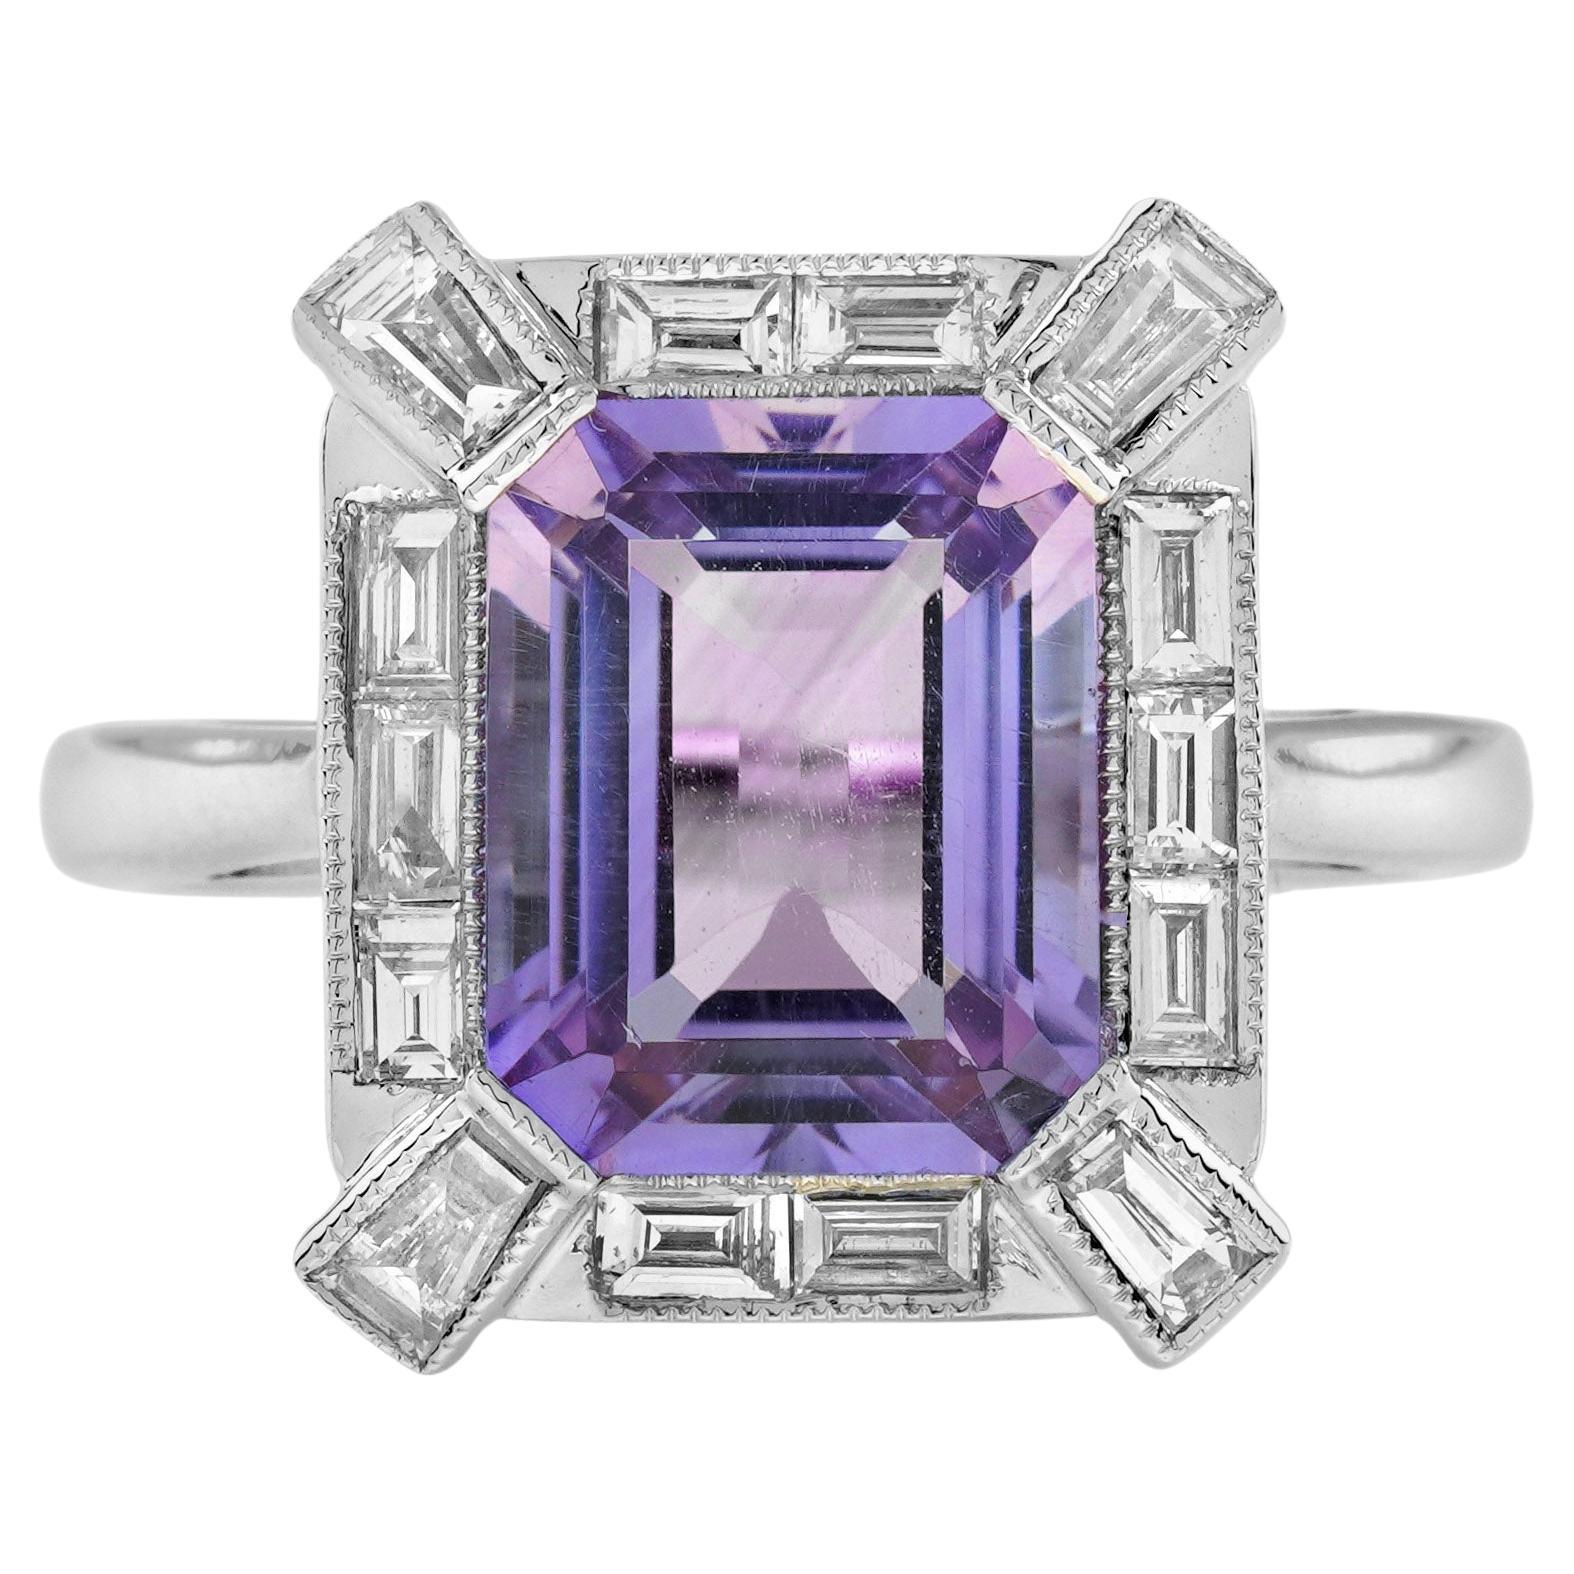 Emerald Cut Pink Amethyst and Diamond Halo Art Deco Style Ring in 14K White Gold